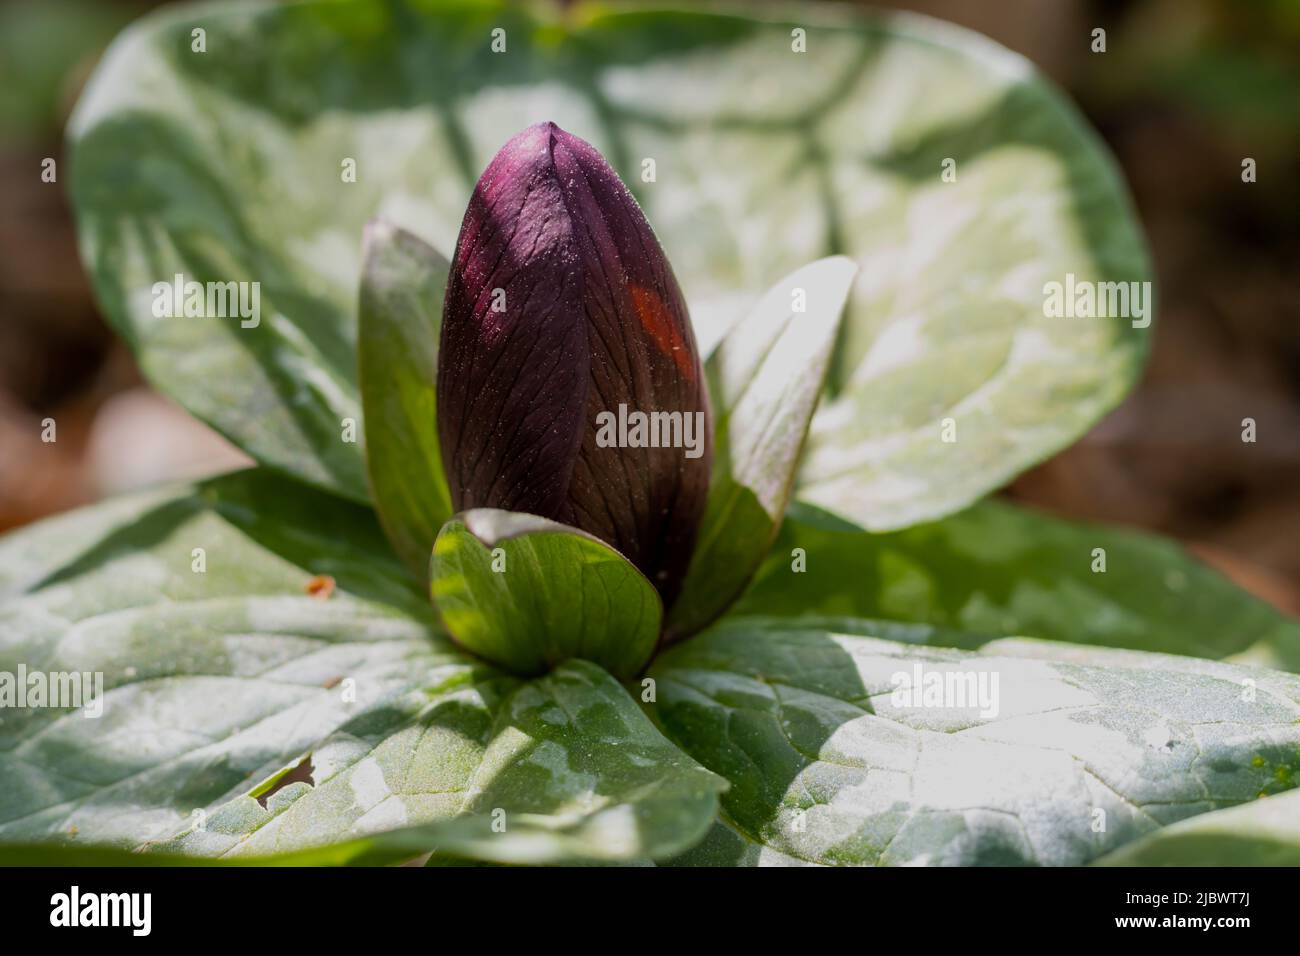 Maroon-Colored Trillium Flower Bud and Green Leaves Stock Photo